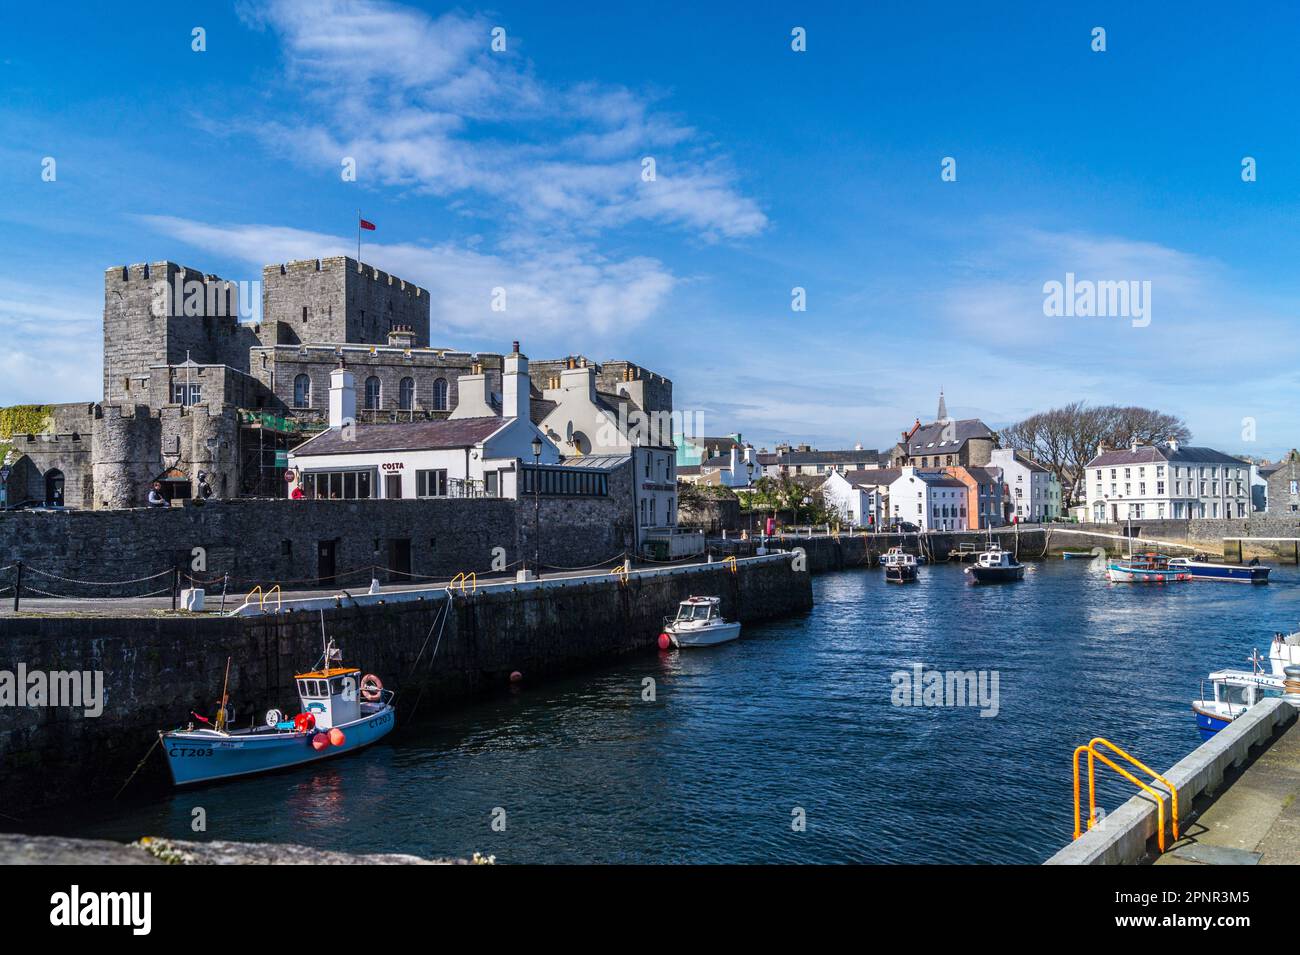 Castle Rushen and harbour, Castletown, Isle of Man Stock Photo